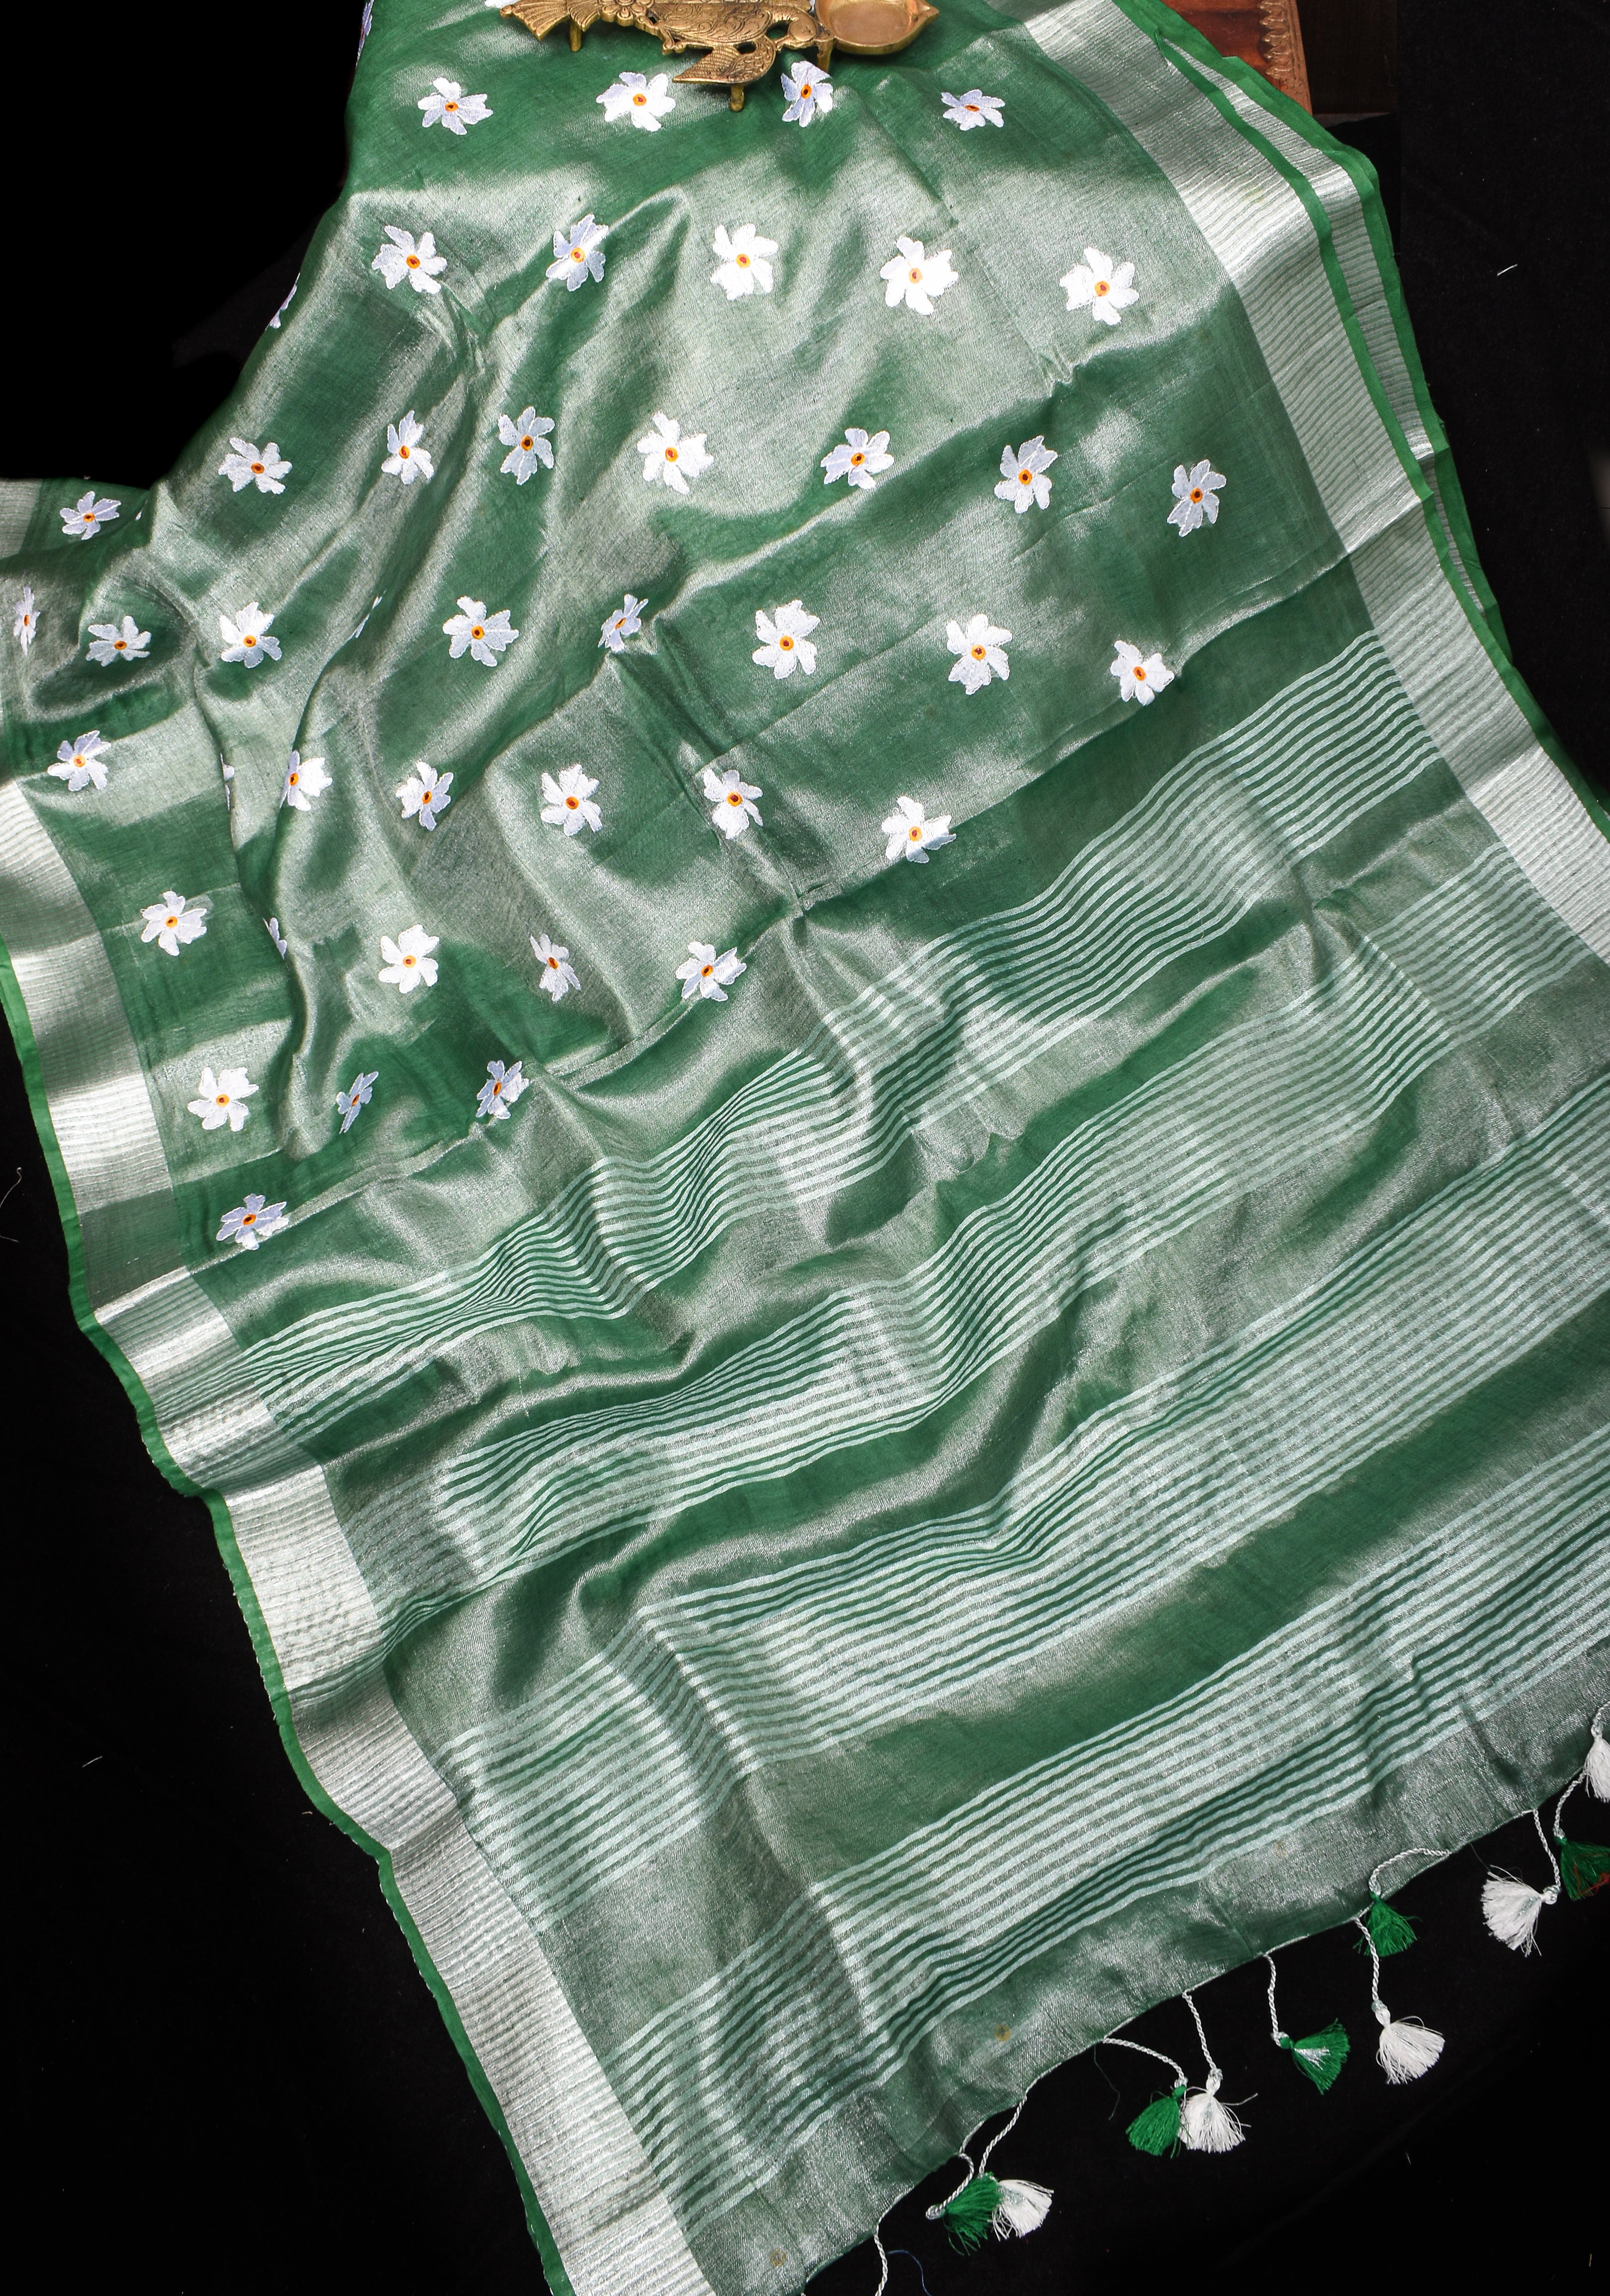 Tissue Linen Saree in Mint Green and Silver with Parijaat floral Embroidery